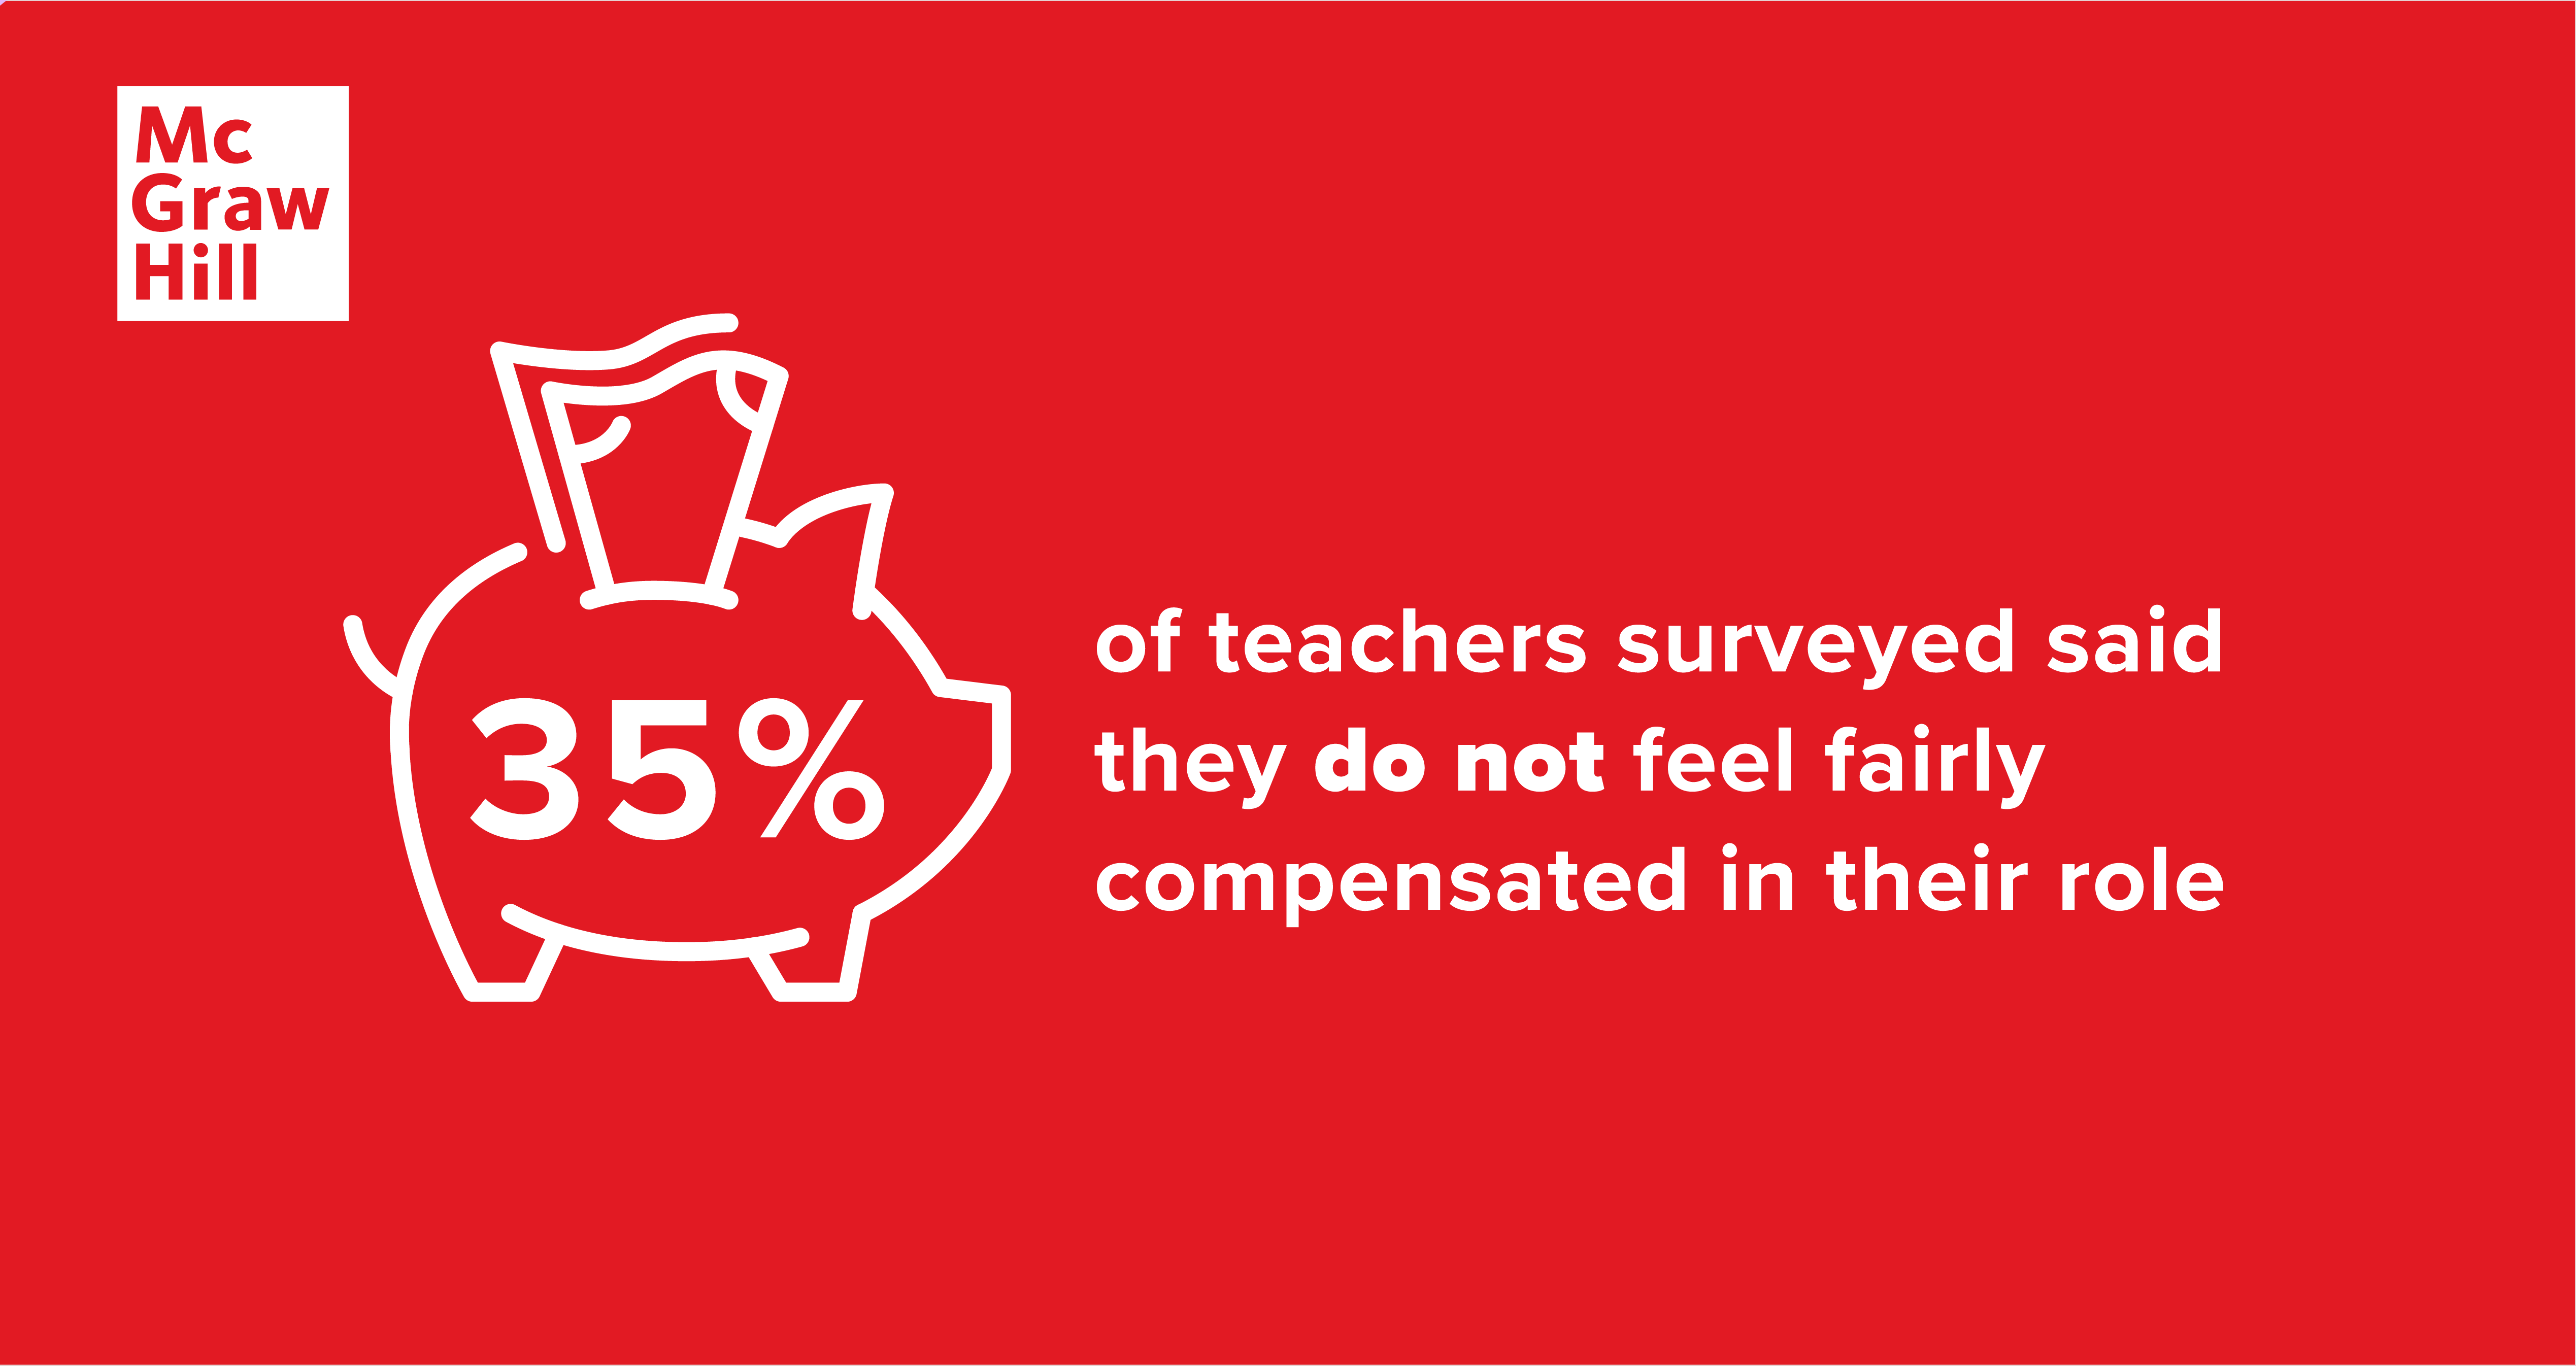 35% of teachers surveyed said they do not feel fairly compensated in their role